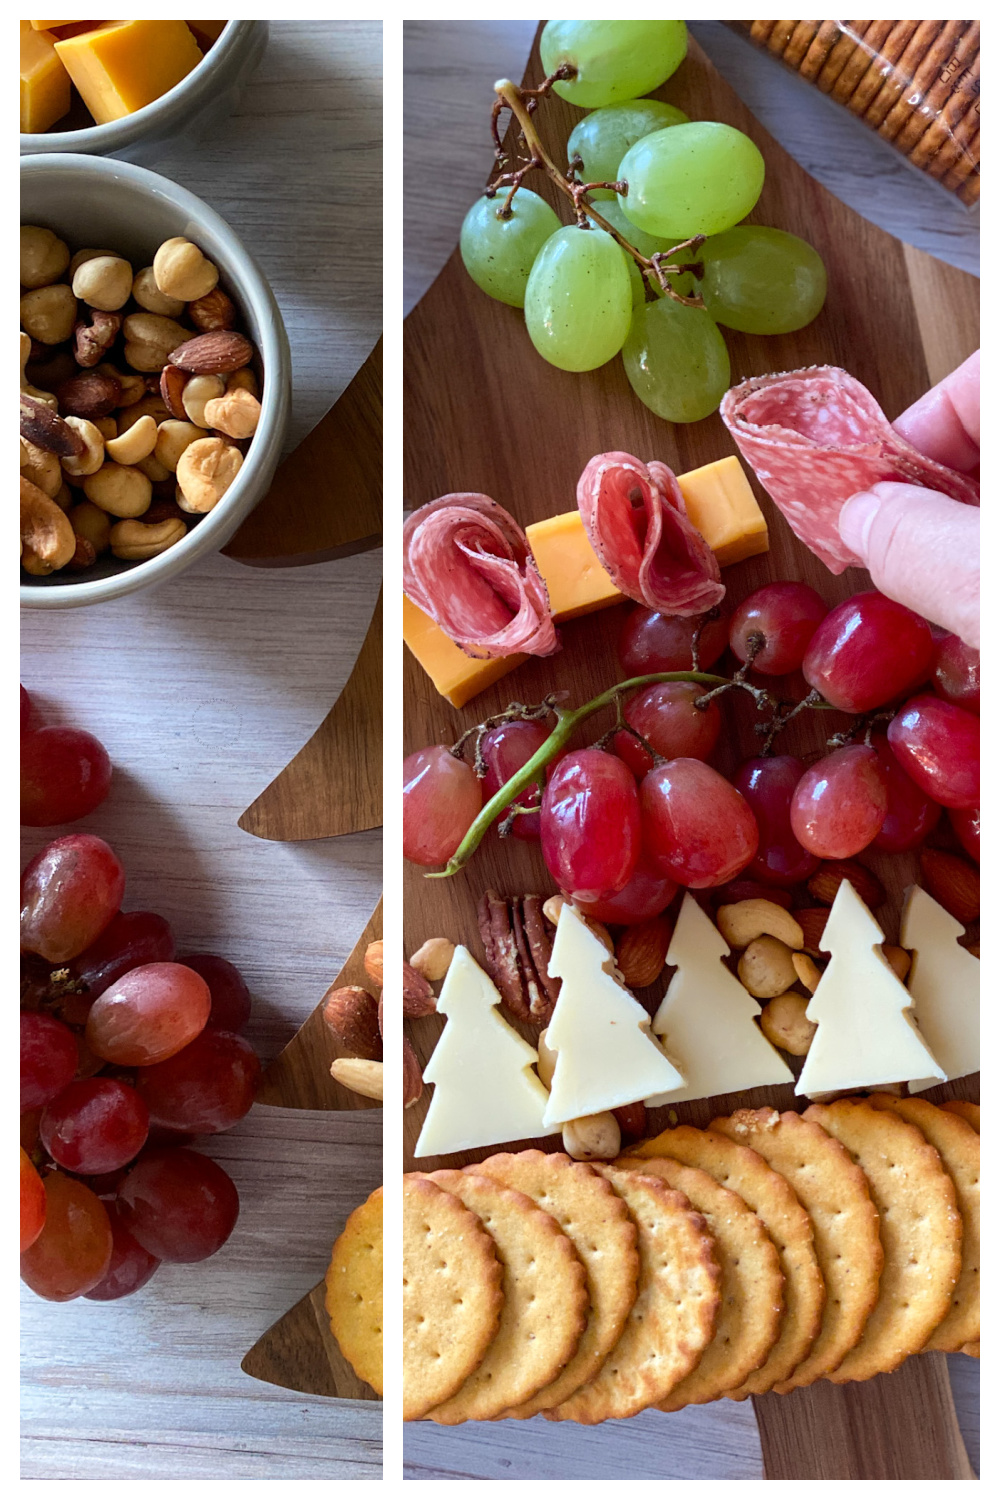 Putting together the holiday cheeseboard for small gatherings